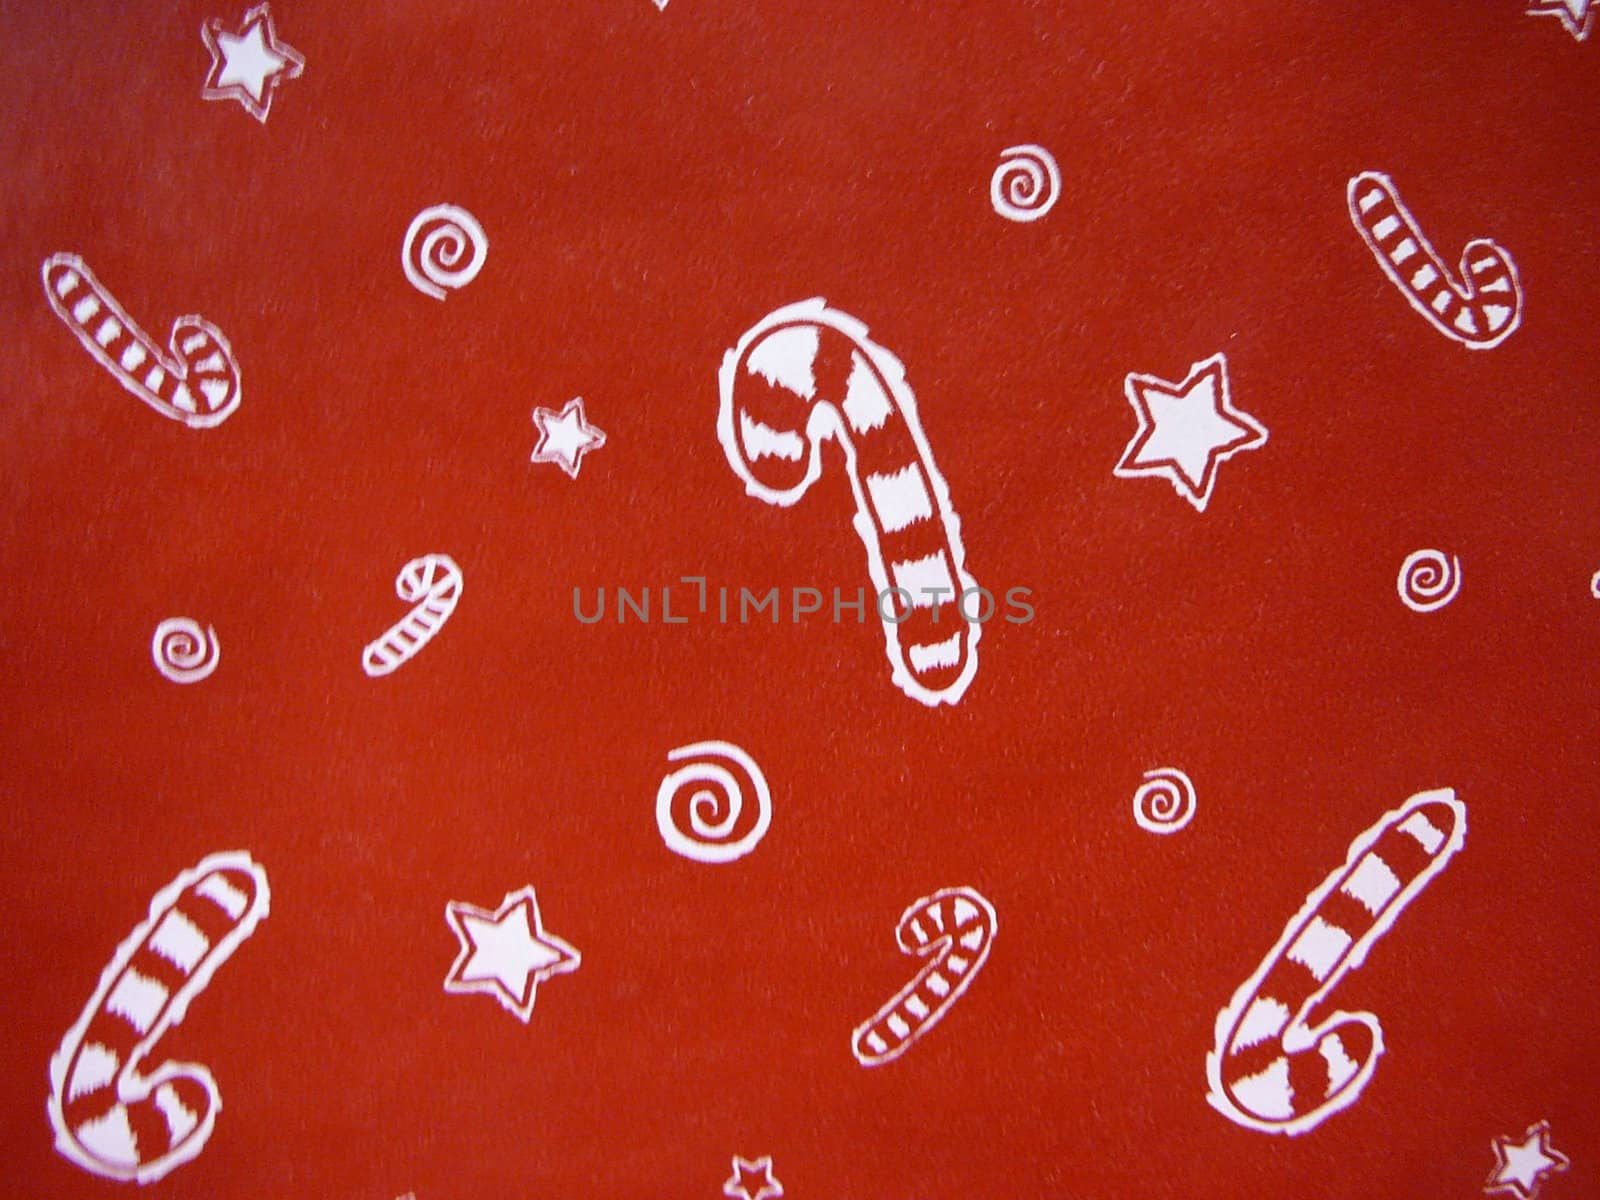 Candy cane background